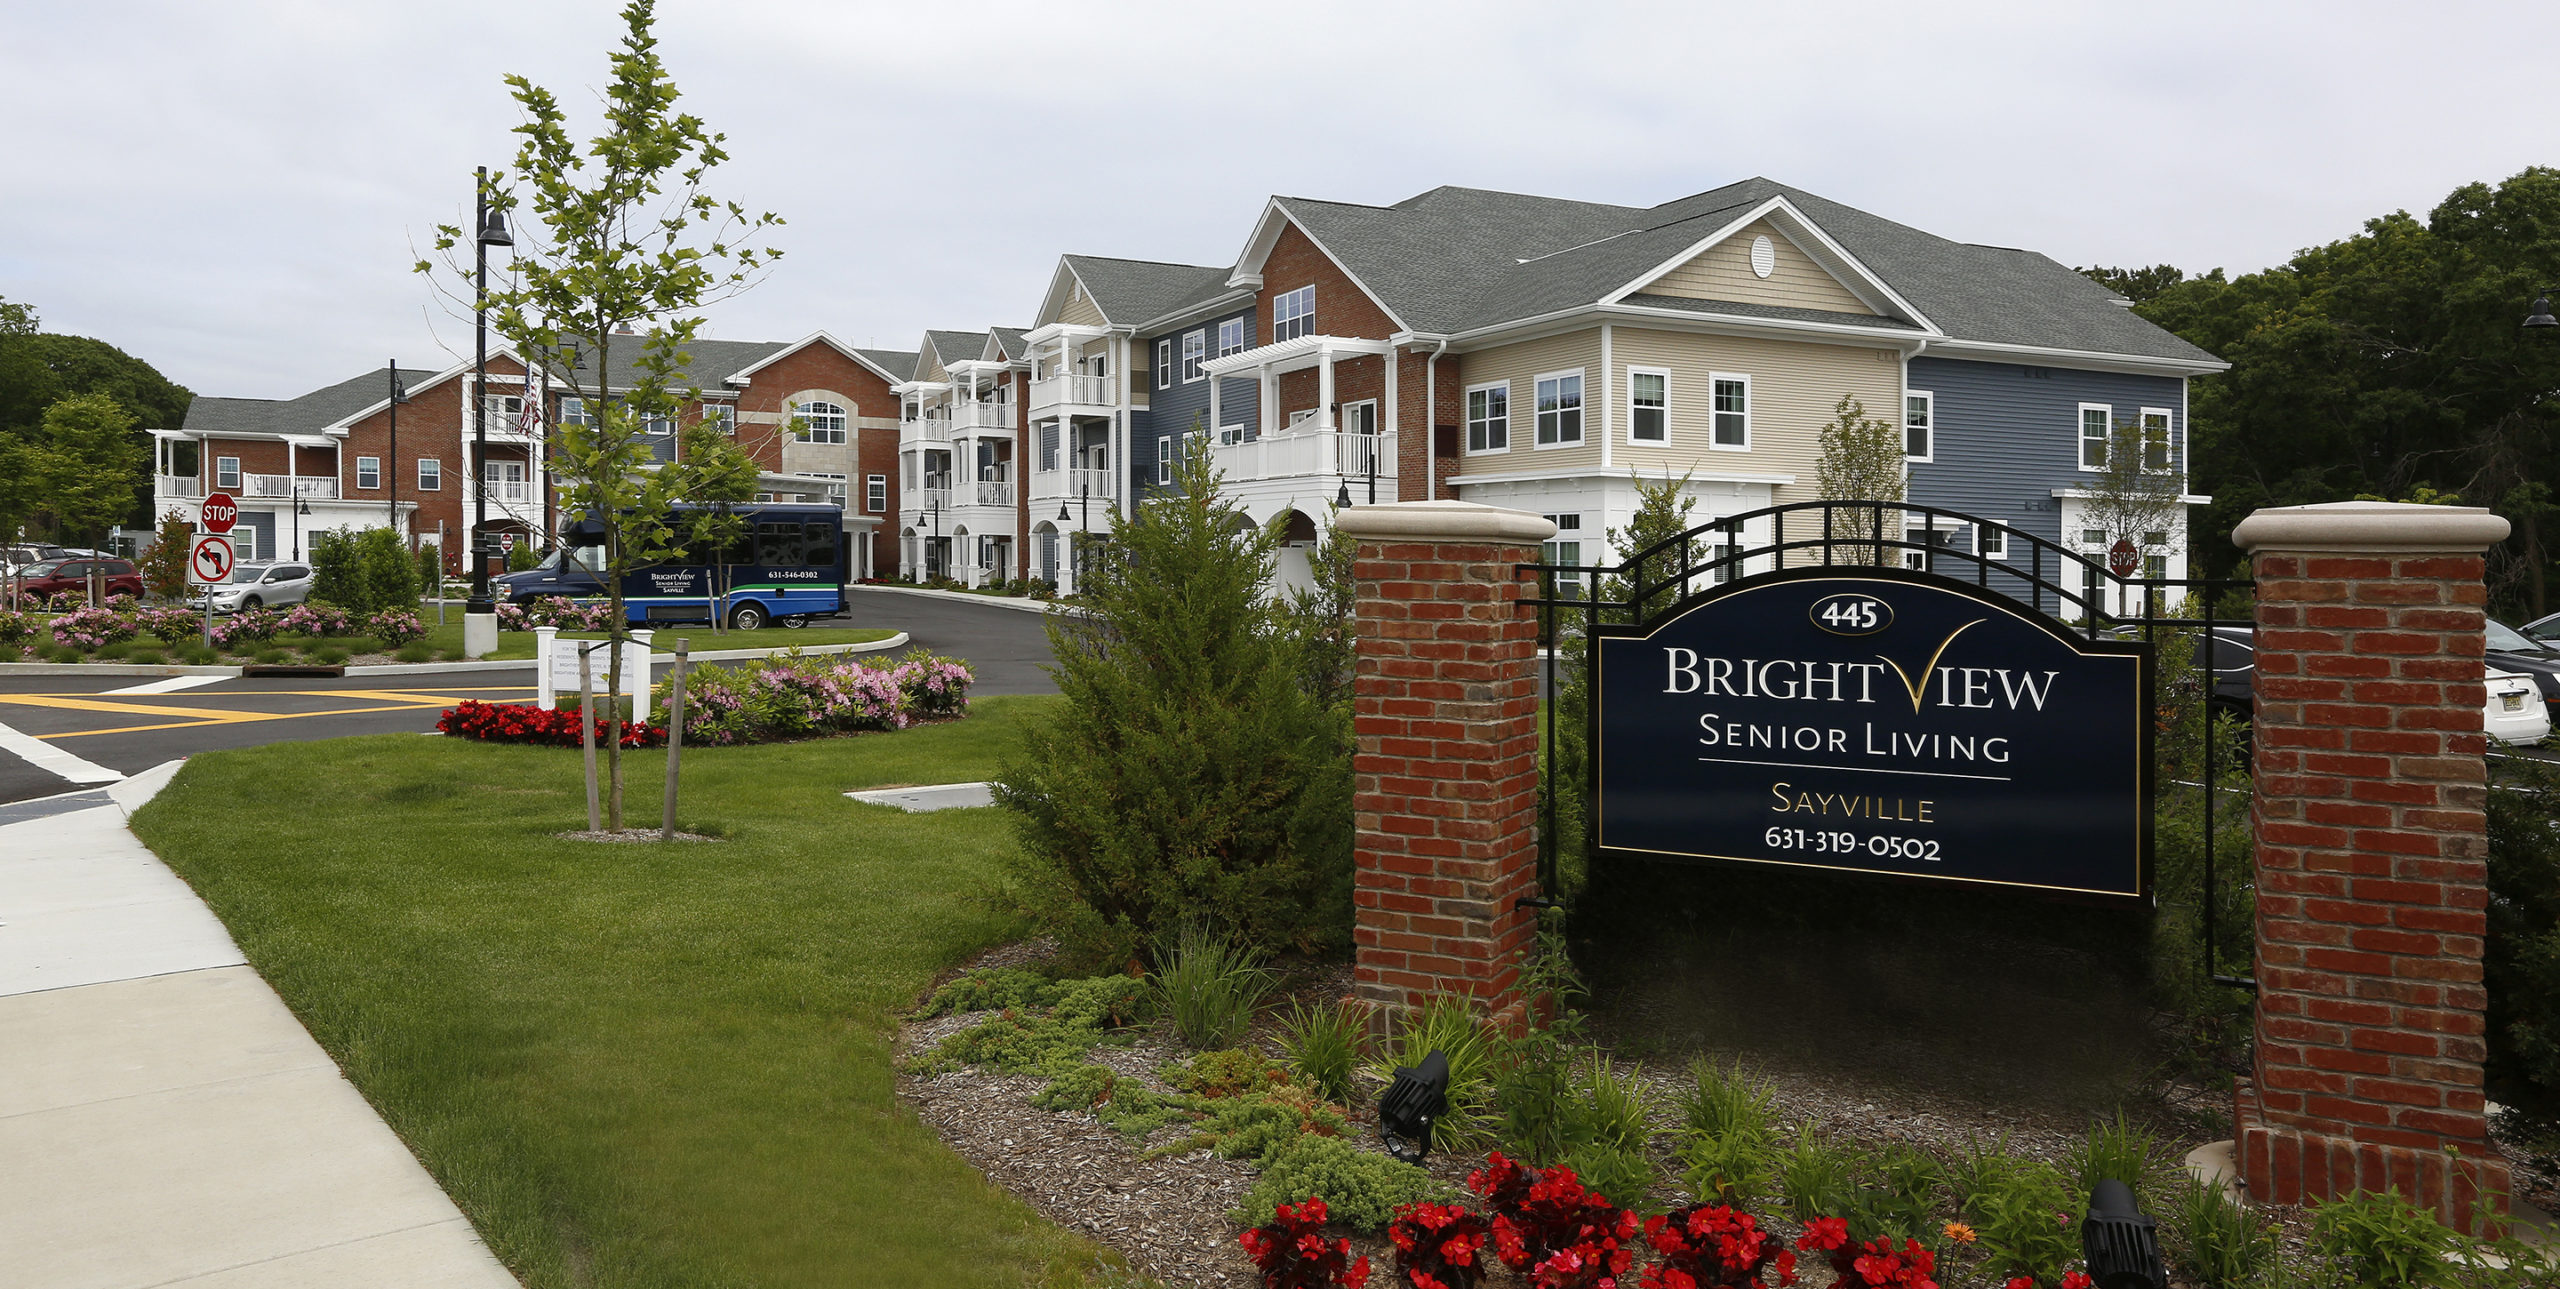 Exterior of the entrance to Brightview Senior Living in Sayville, NY